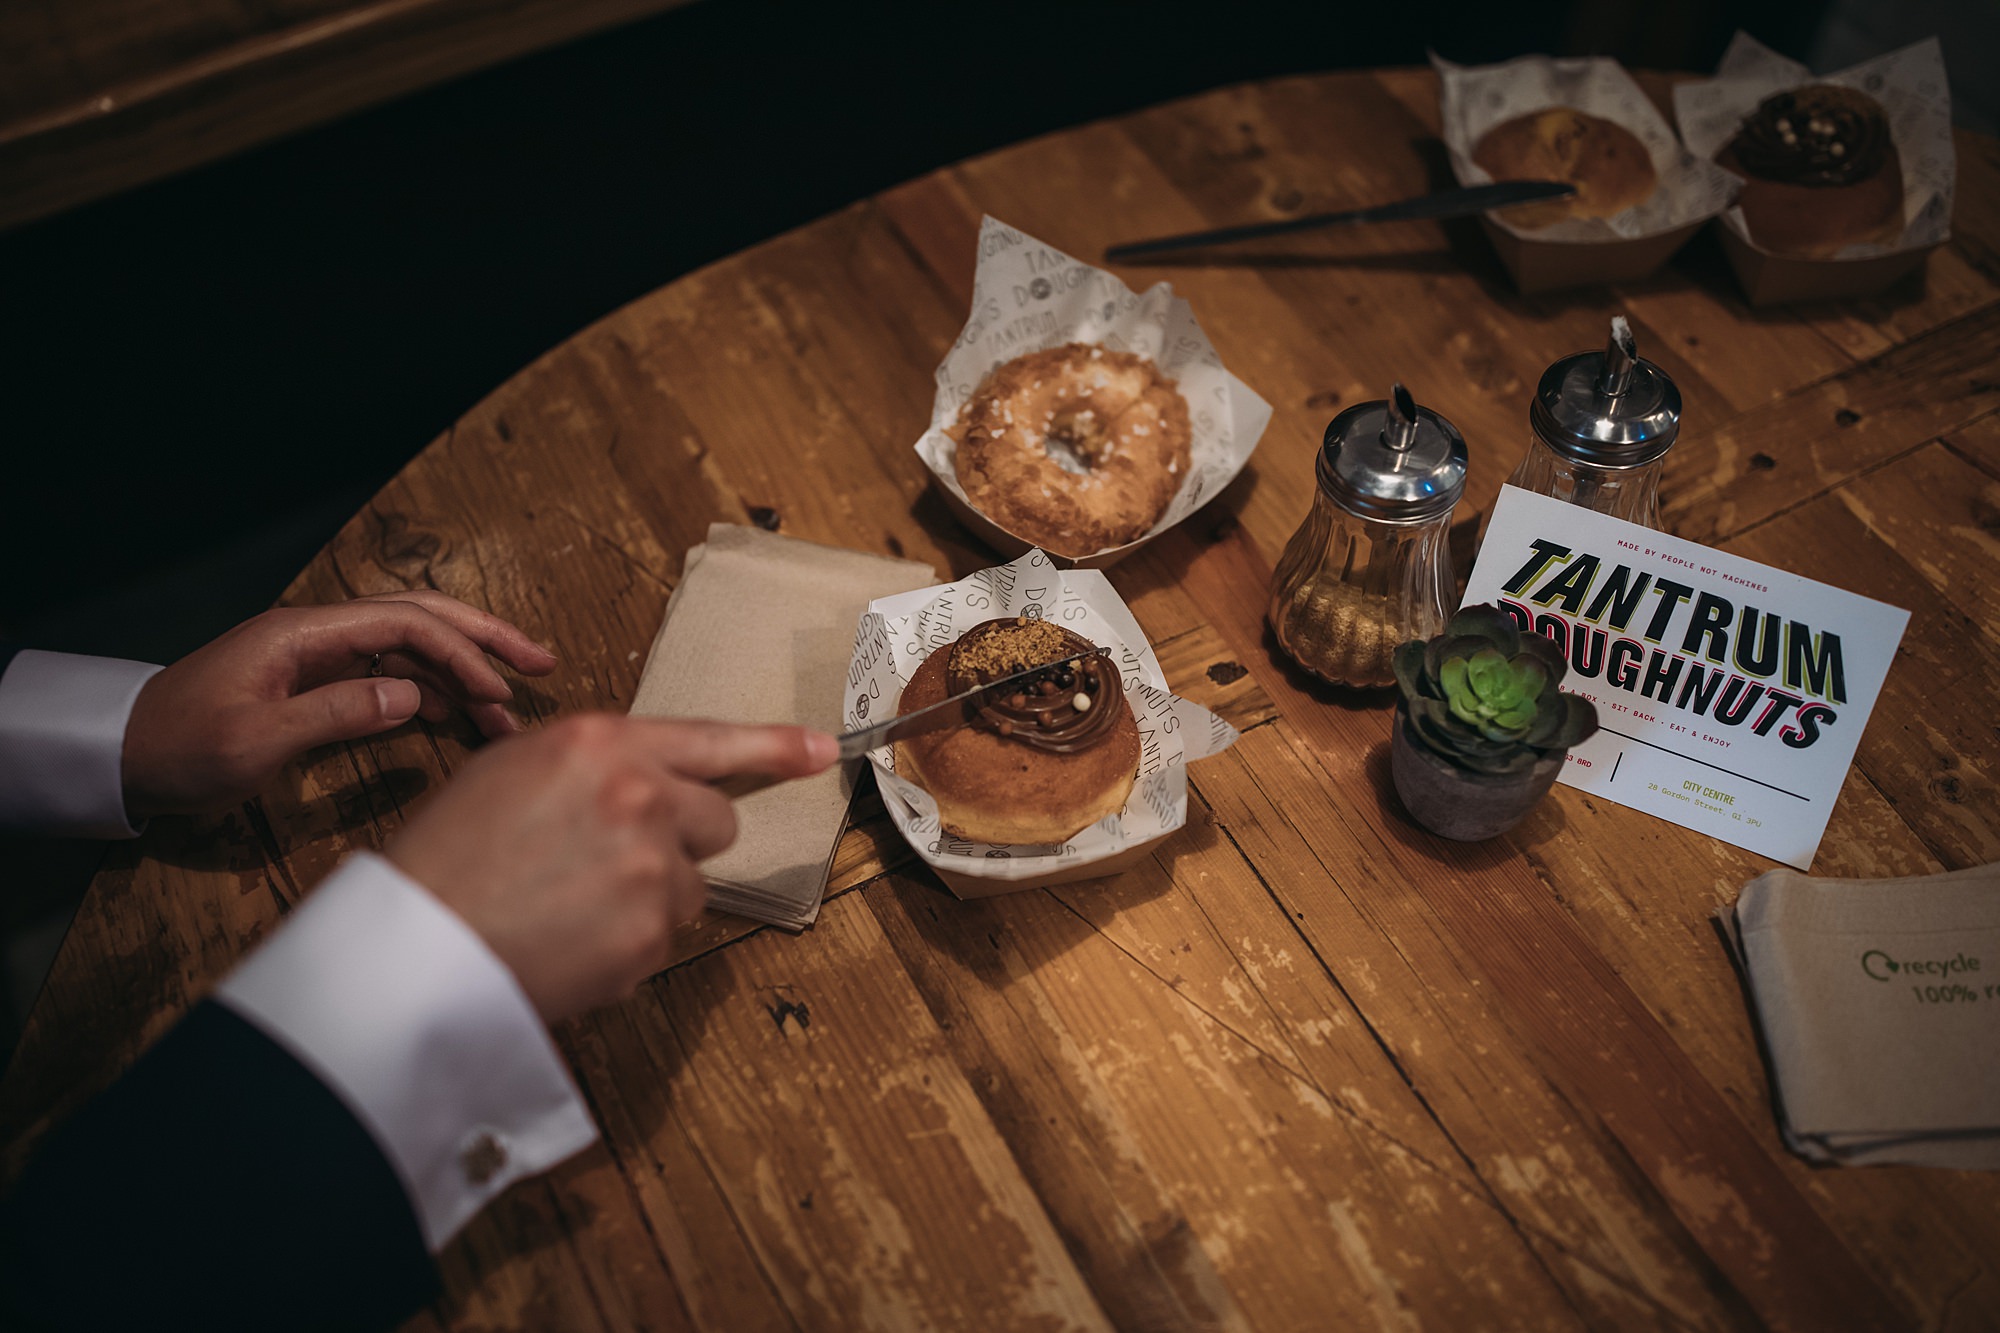 The best donuts in the city can be found at Tantrum Donuts, taken during a Glasgow elopement.